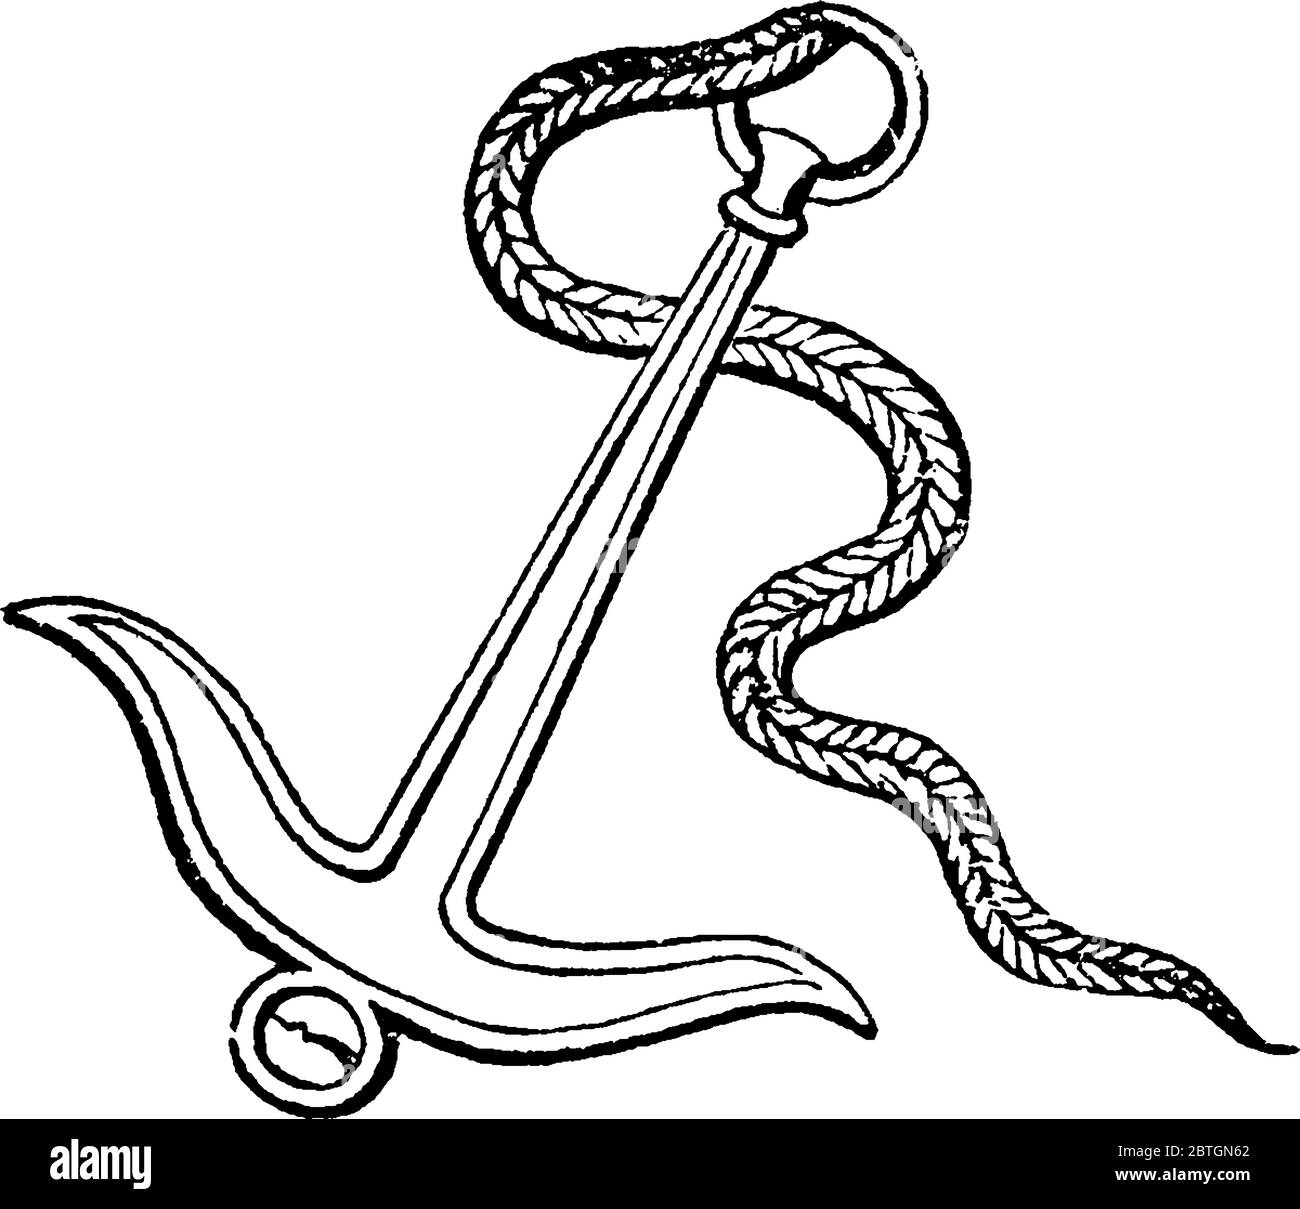 https://c8.alamy.com/comp/2BTGN62/a-typical-representation-of-a-modern-anchor-the-anchor-was-used-by-the-ancients-in-which-most-of-the-parts-were-made-of-iron-and-its-form-vintage-l-2BTGN62.jpg